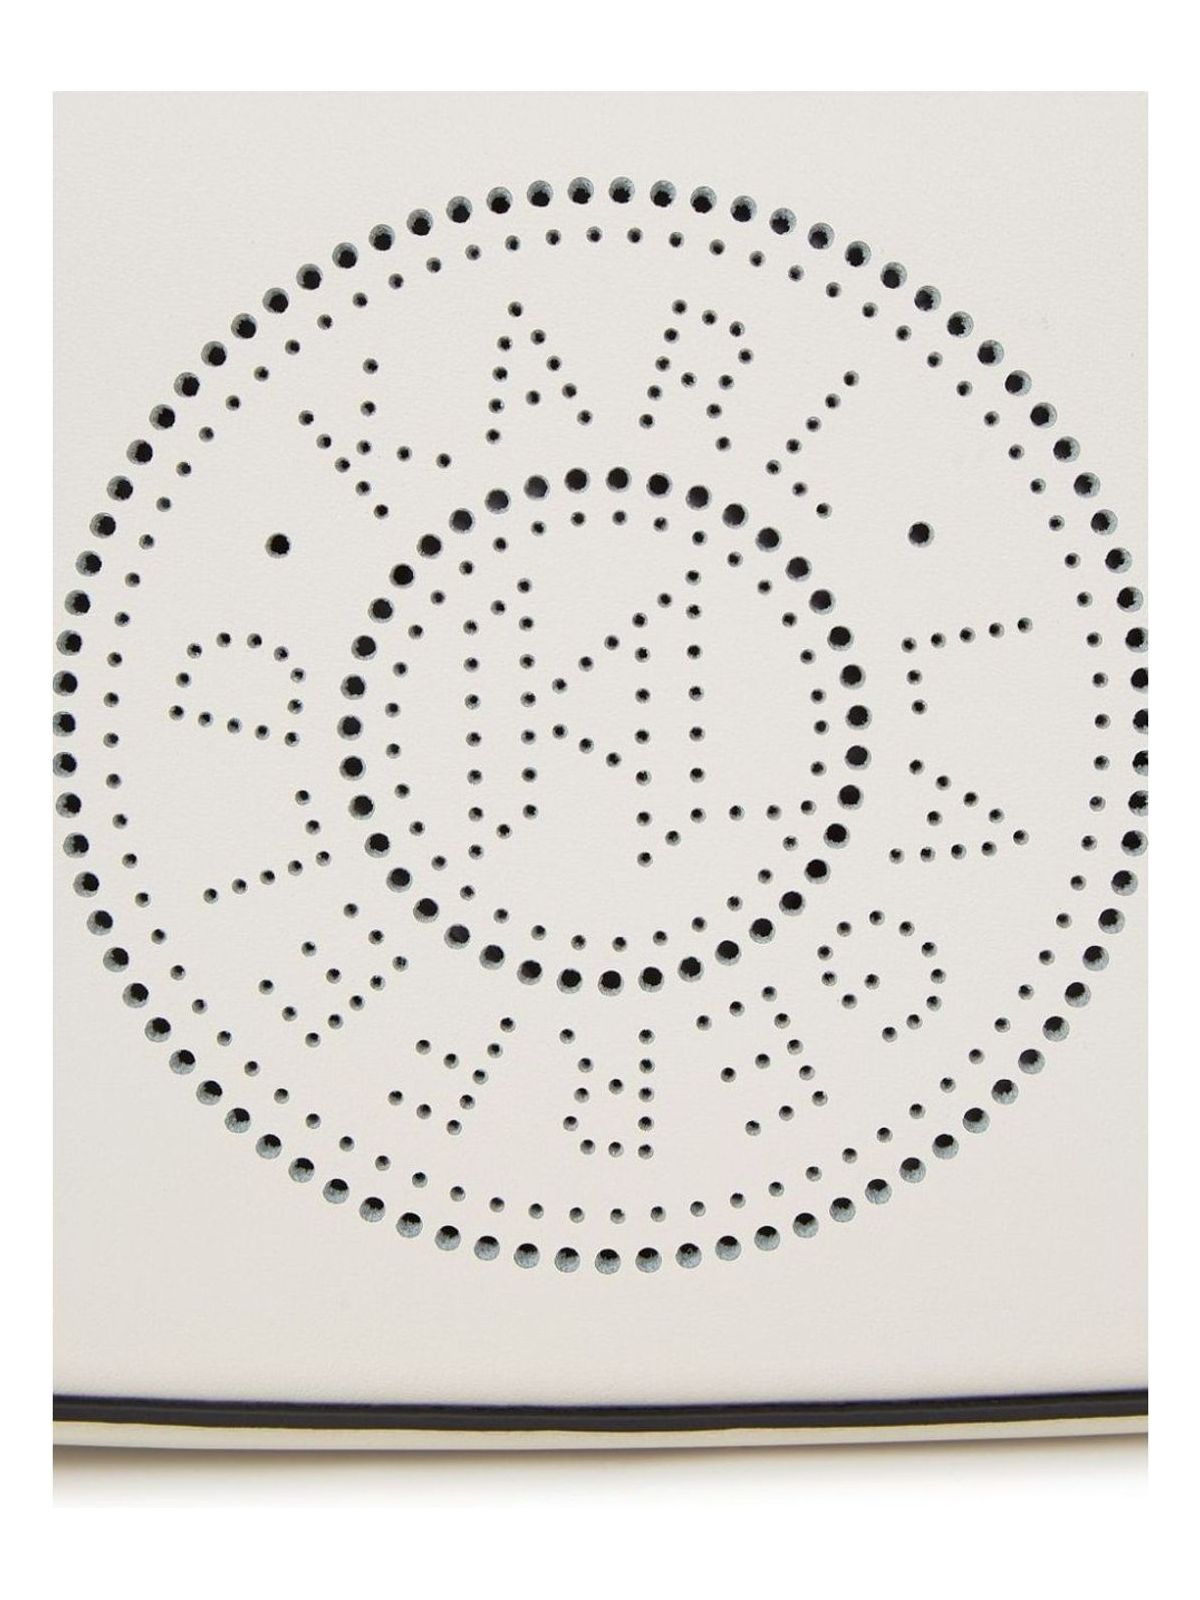 A110 KARL LAGERFELD WHITE CROSSBODY PERFORATED ROUND LOGO